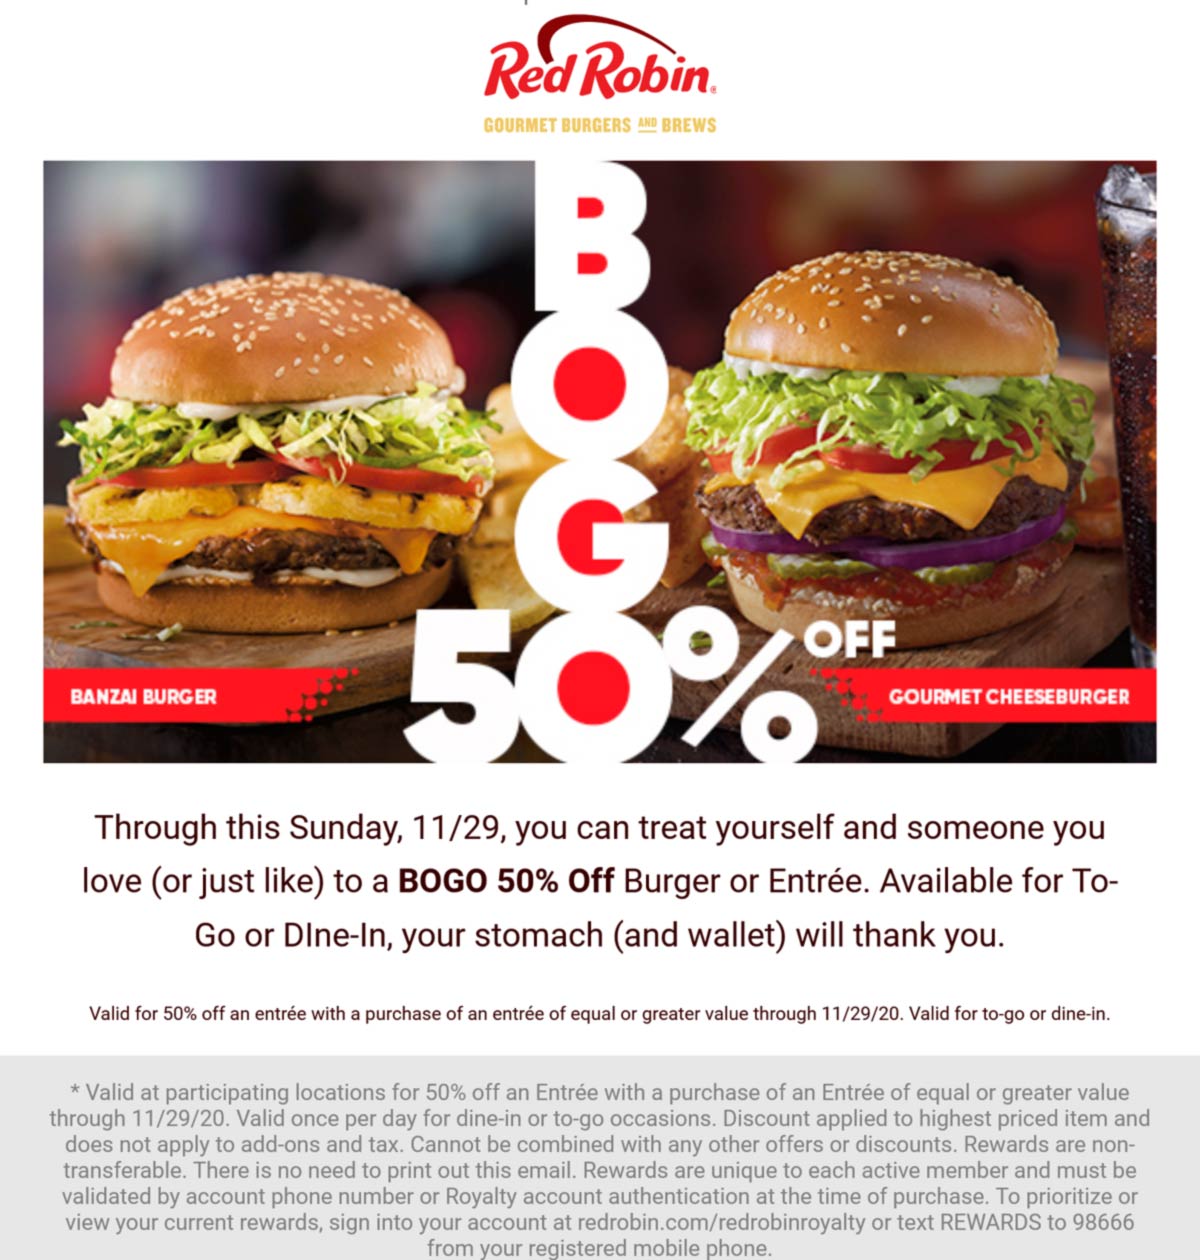 Second entree or cheeseburger 50 off for loyalty peeps at Red Robin 